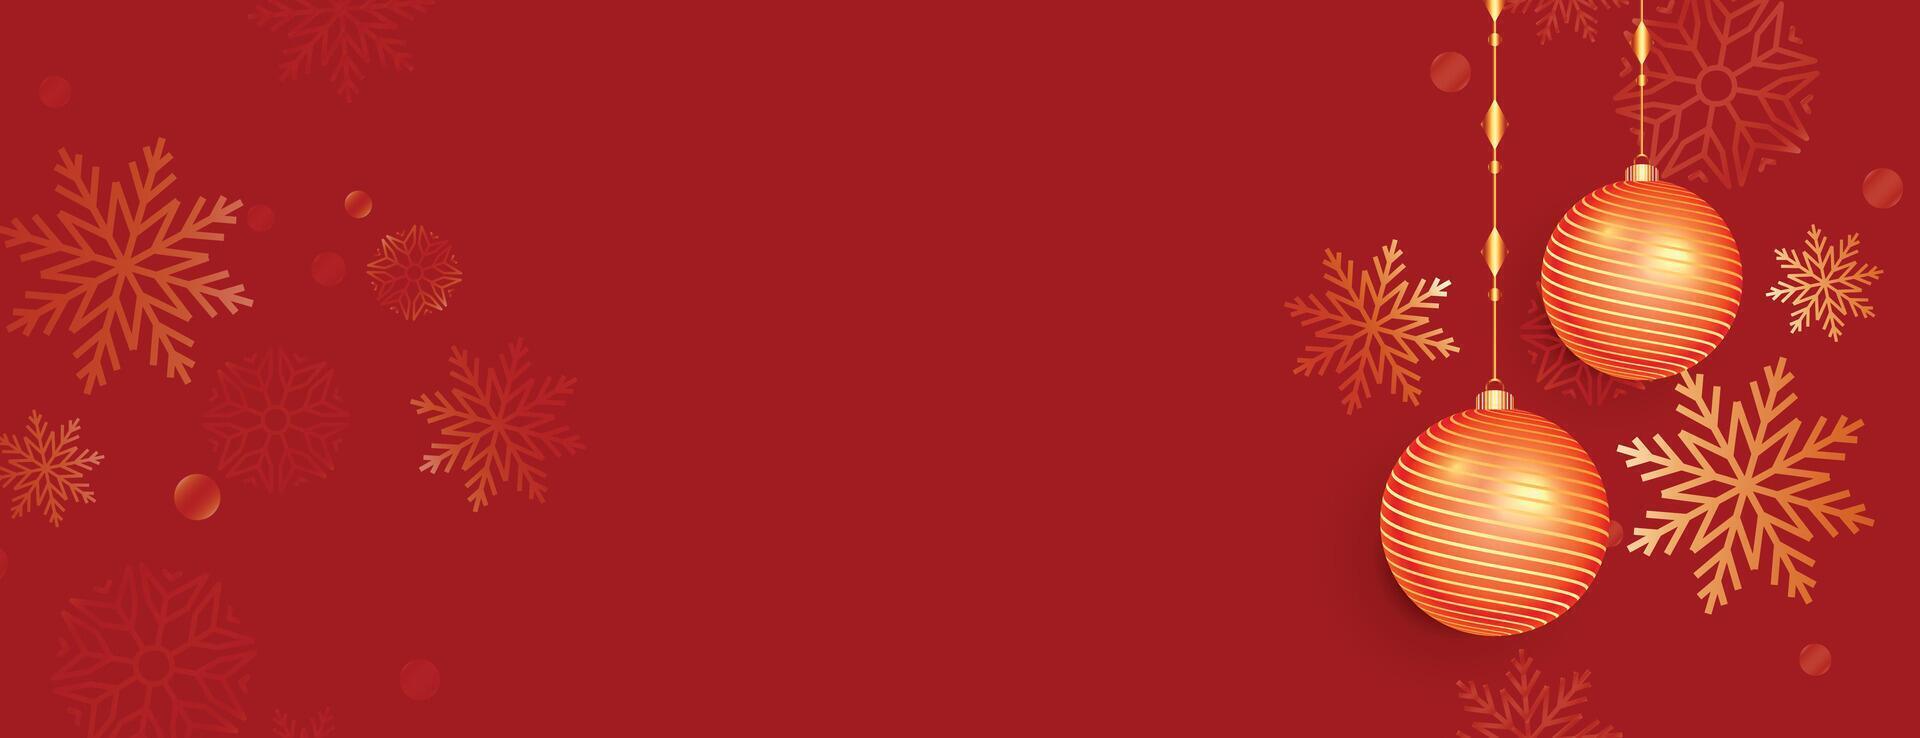 red chriatmas banner with baubles and snowflake decoration vector